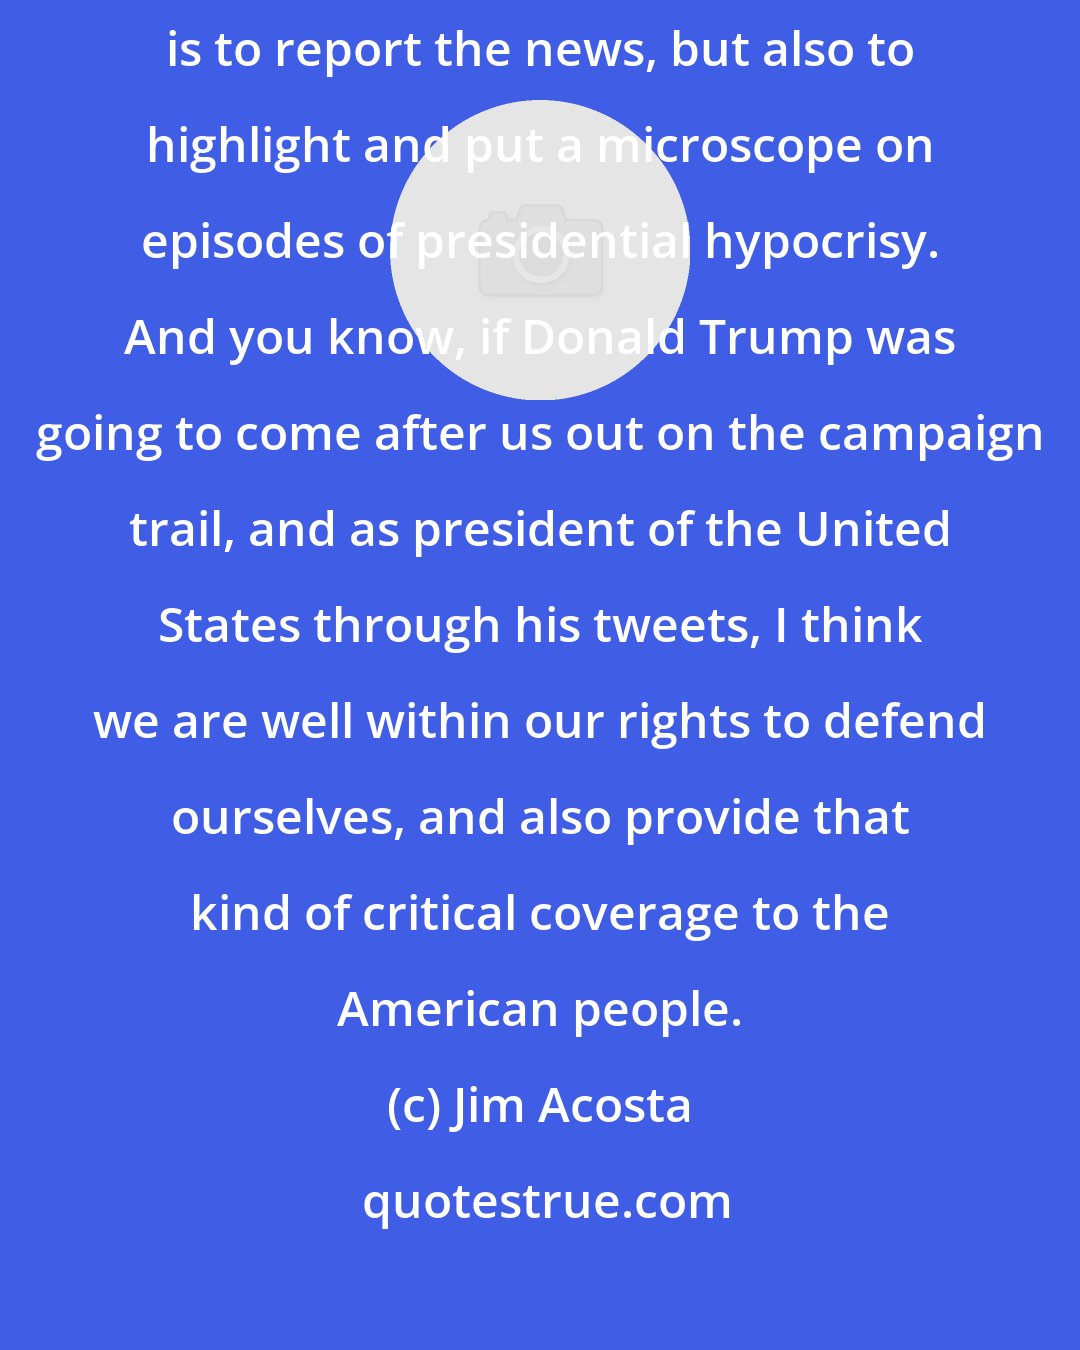 Jim Acosta: My job as a reporter, my job as a senior White House correspondent for CNN, is to report the news, but also to highlight and put a microscope on episodes of presidential hypocrisy. And you know, if Donald Trump was going to come after us out on the campaign trail, and as president of the United States through his tweets, I think we are well within our rights to defend ourselves, and also provide that kind of critical coverage to the American people.